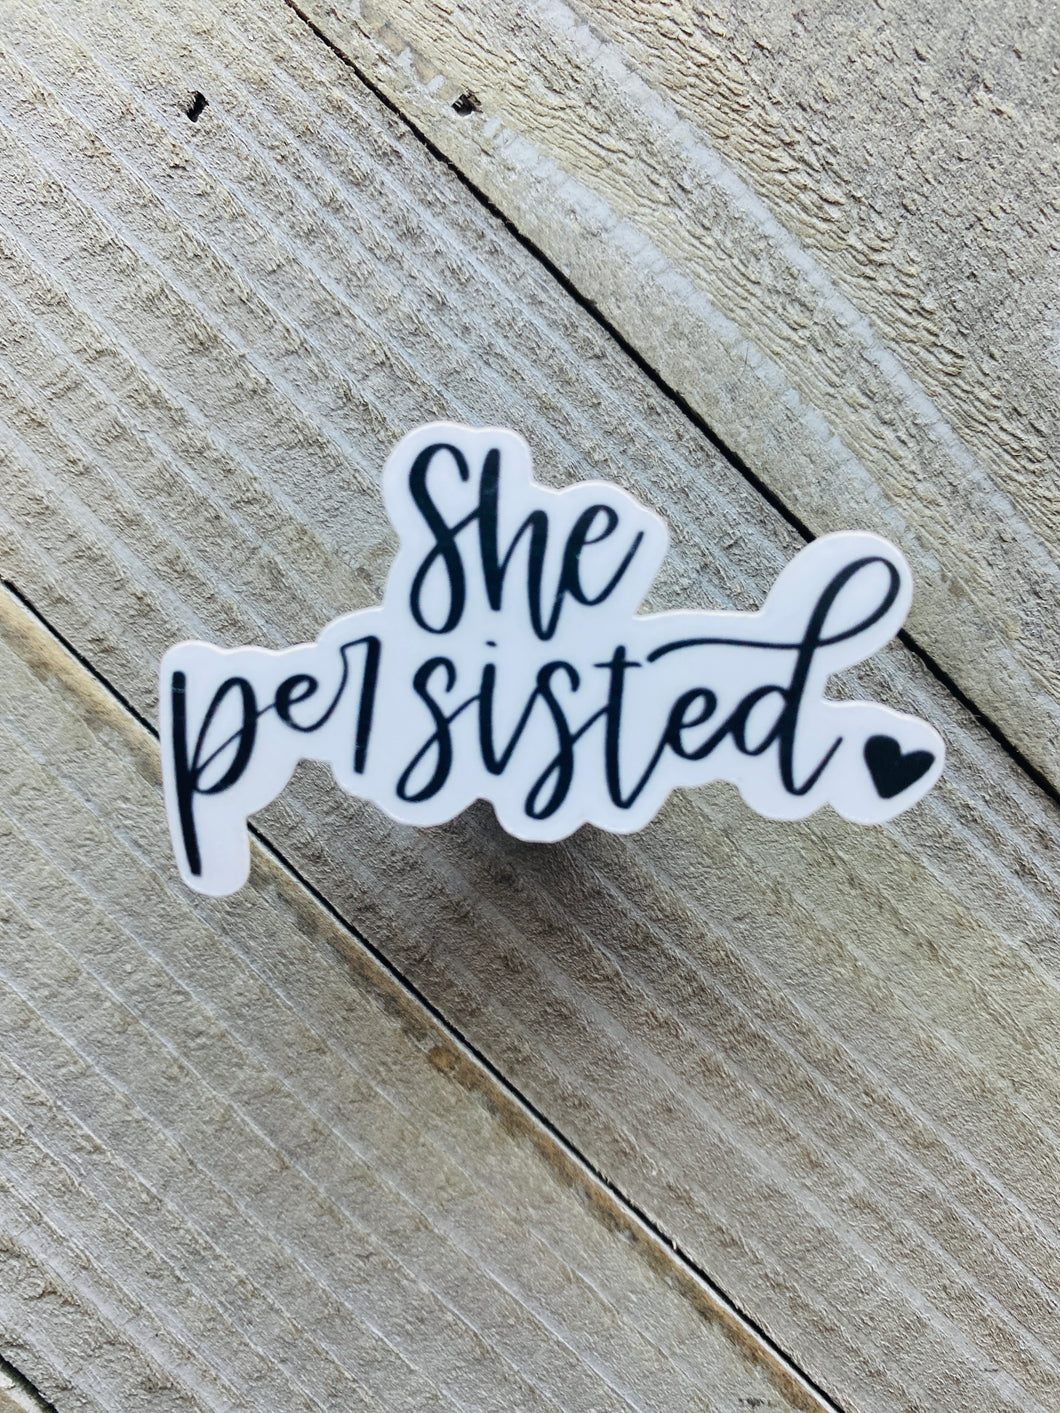 She Persisted - Sticker